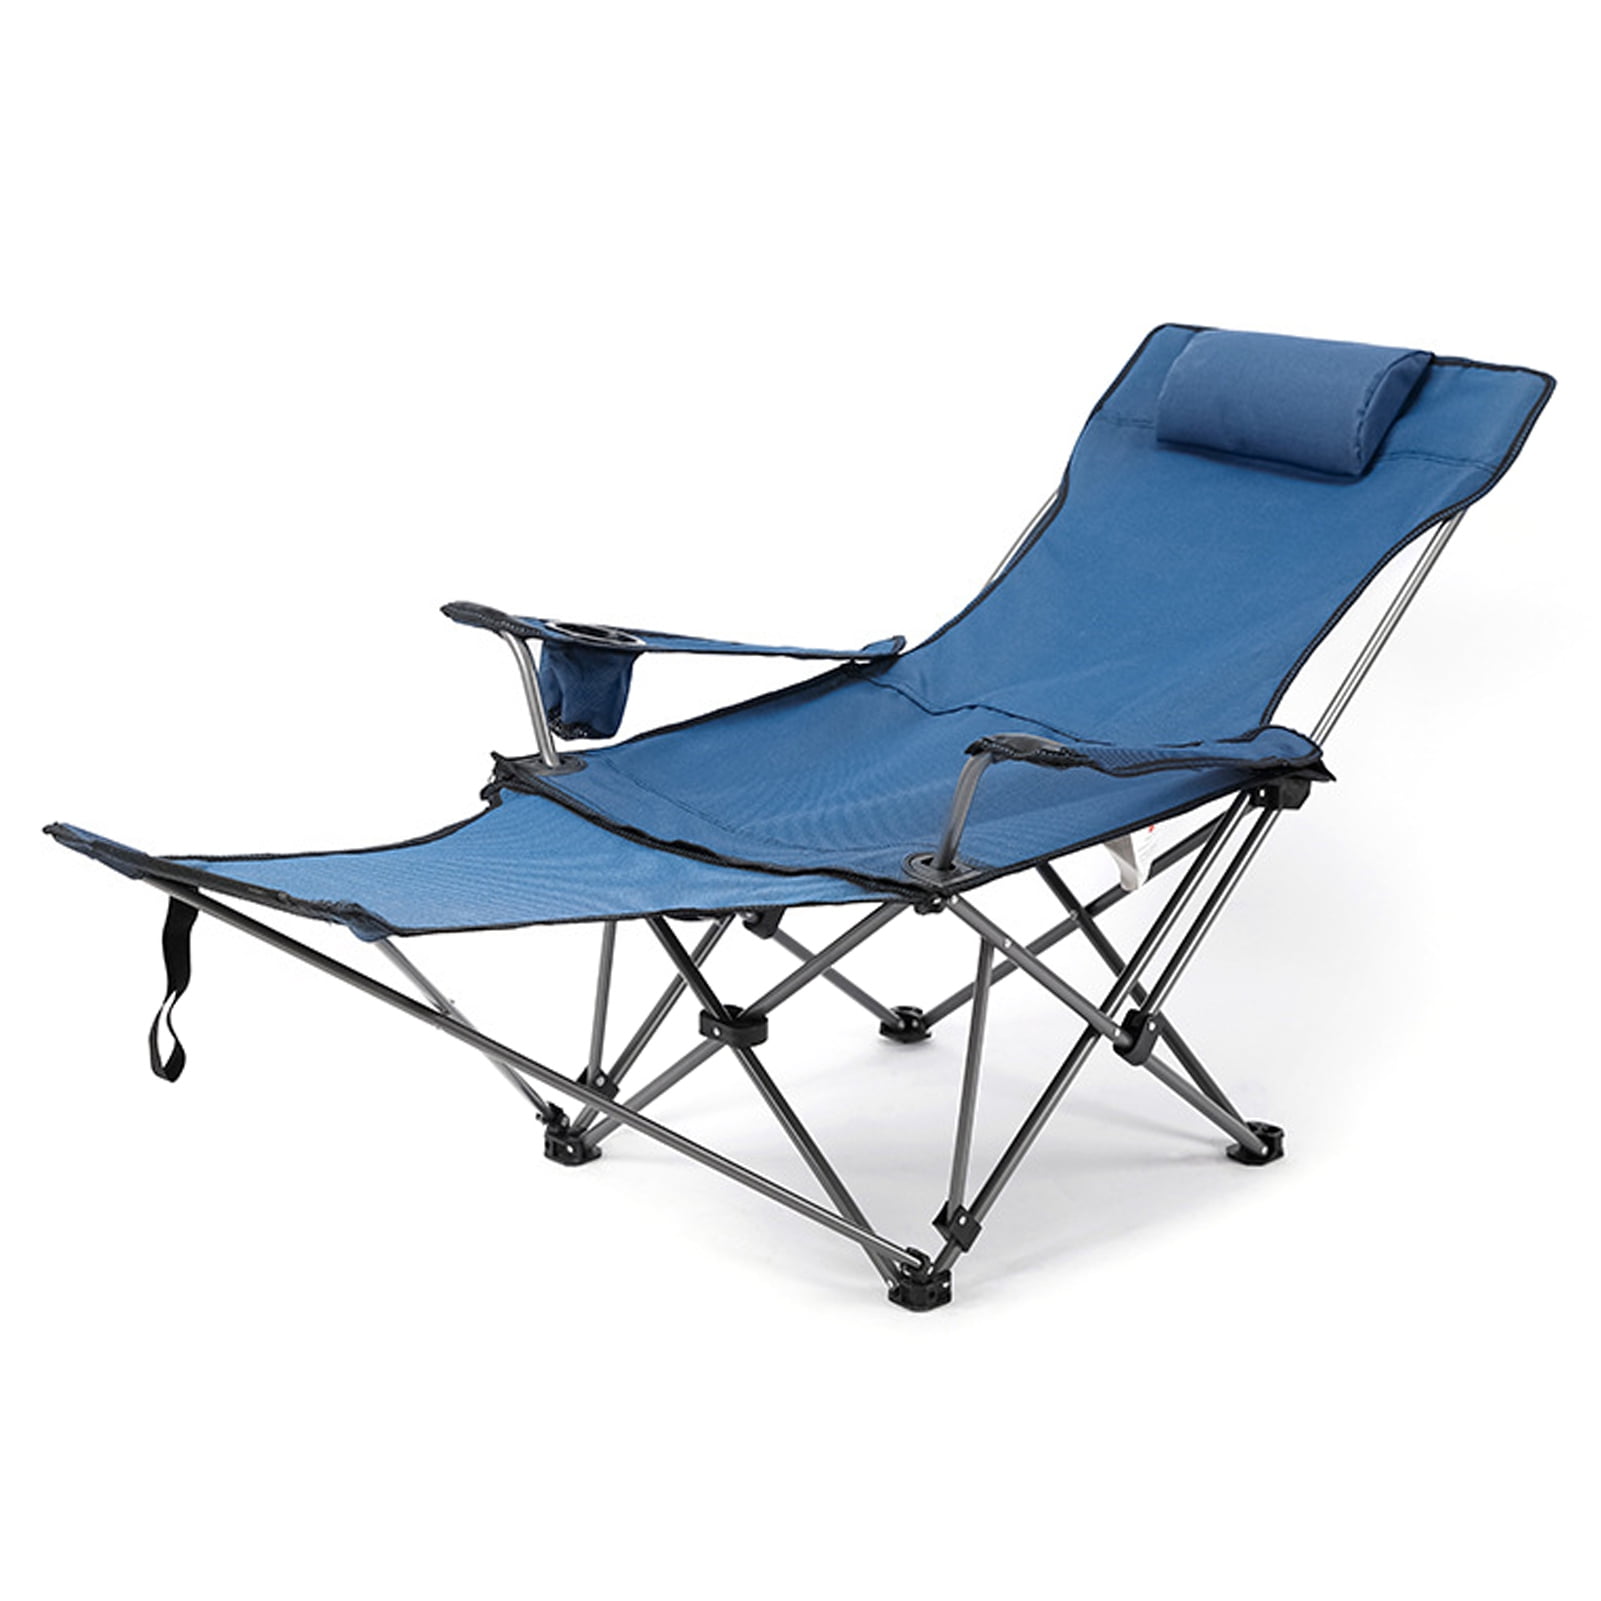 Reclining Folding Camp Lounge Chair Footrest Portable Nap Outdoor Beach Fishing 